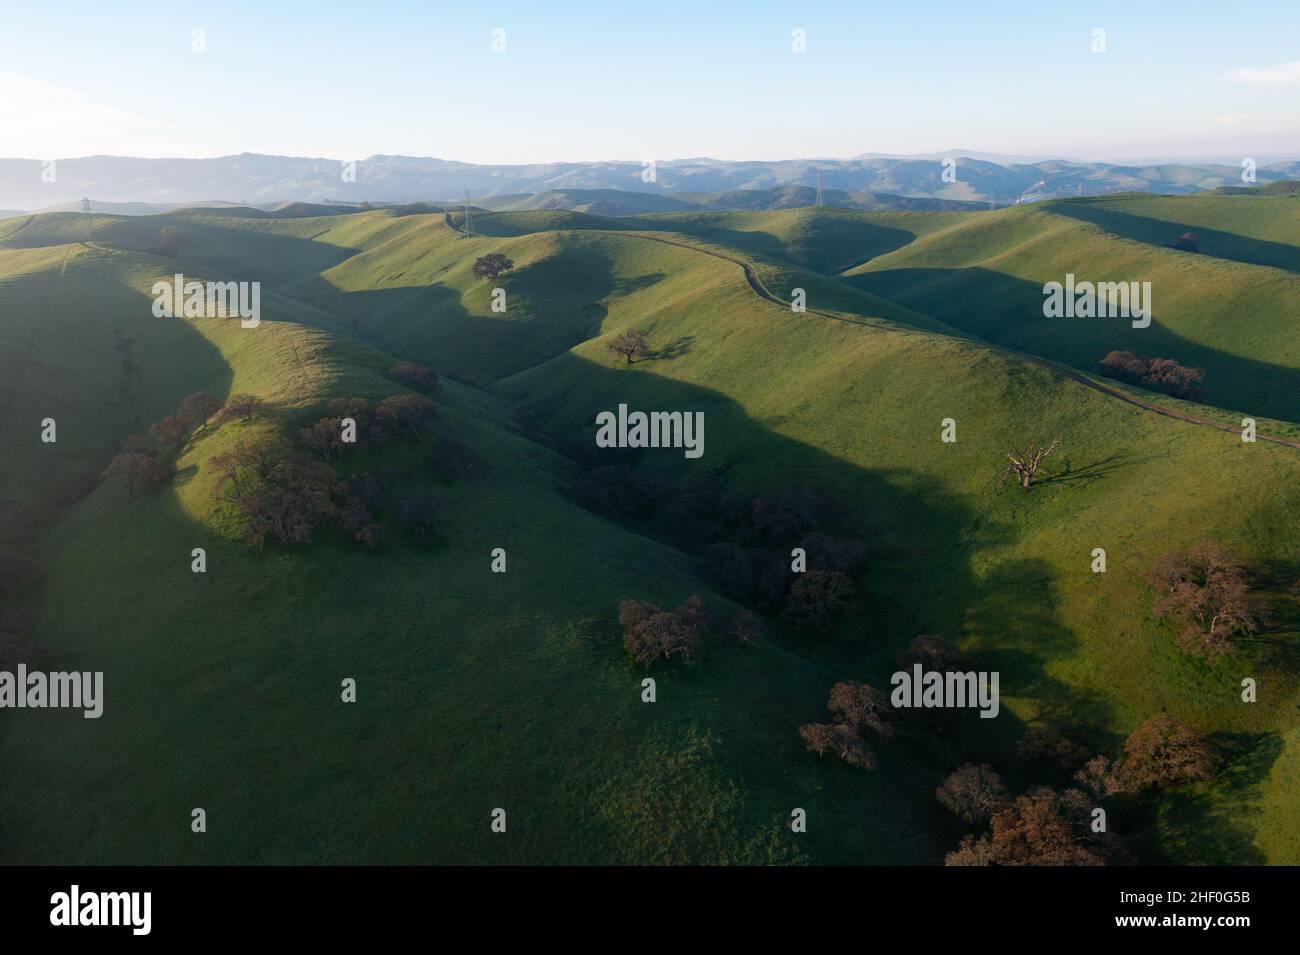 Early morning light shines on the scenic, rolling hills and valleys of the Tri-valley area of Northern California, just east of San Francisco Bay. Stock Photo